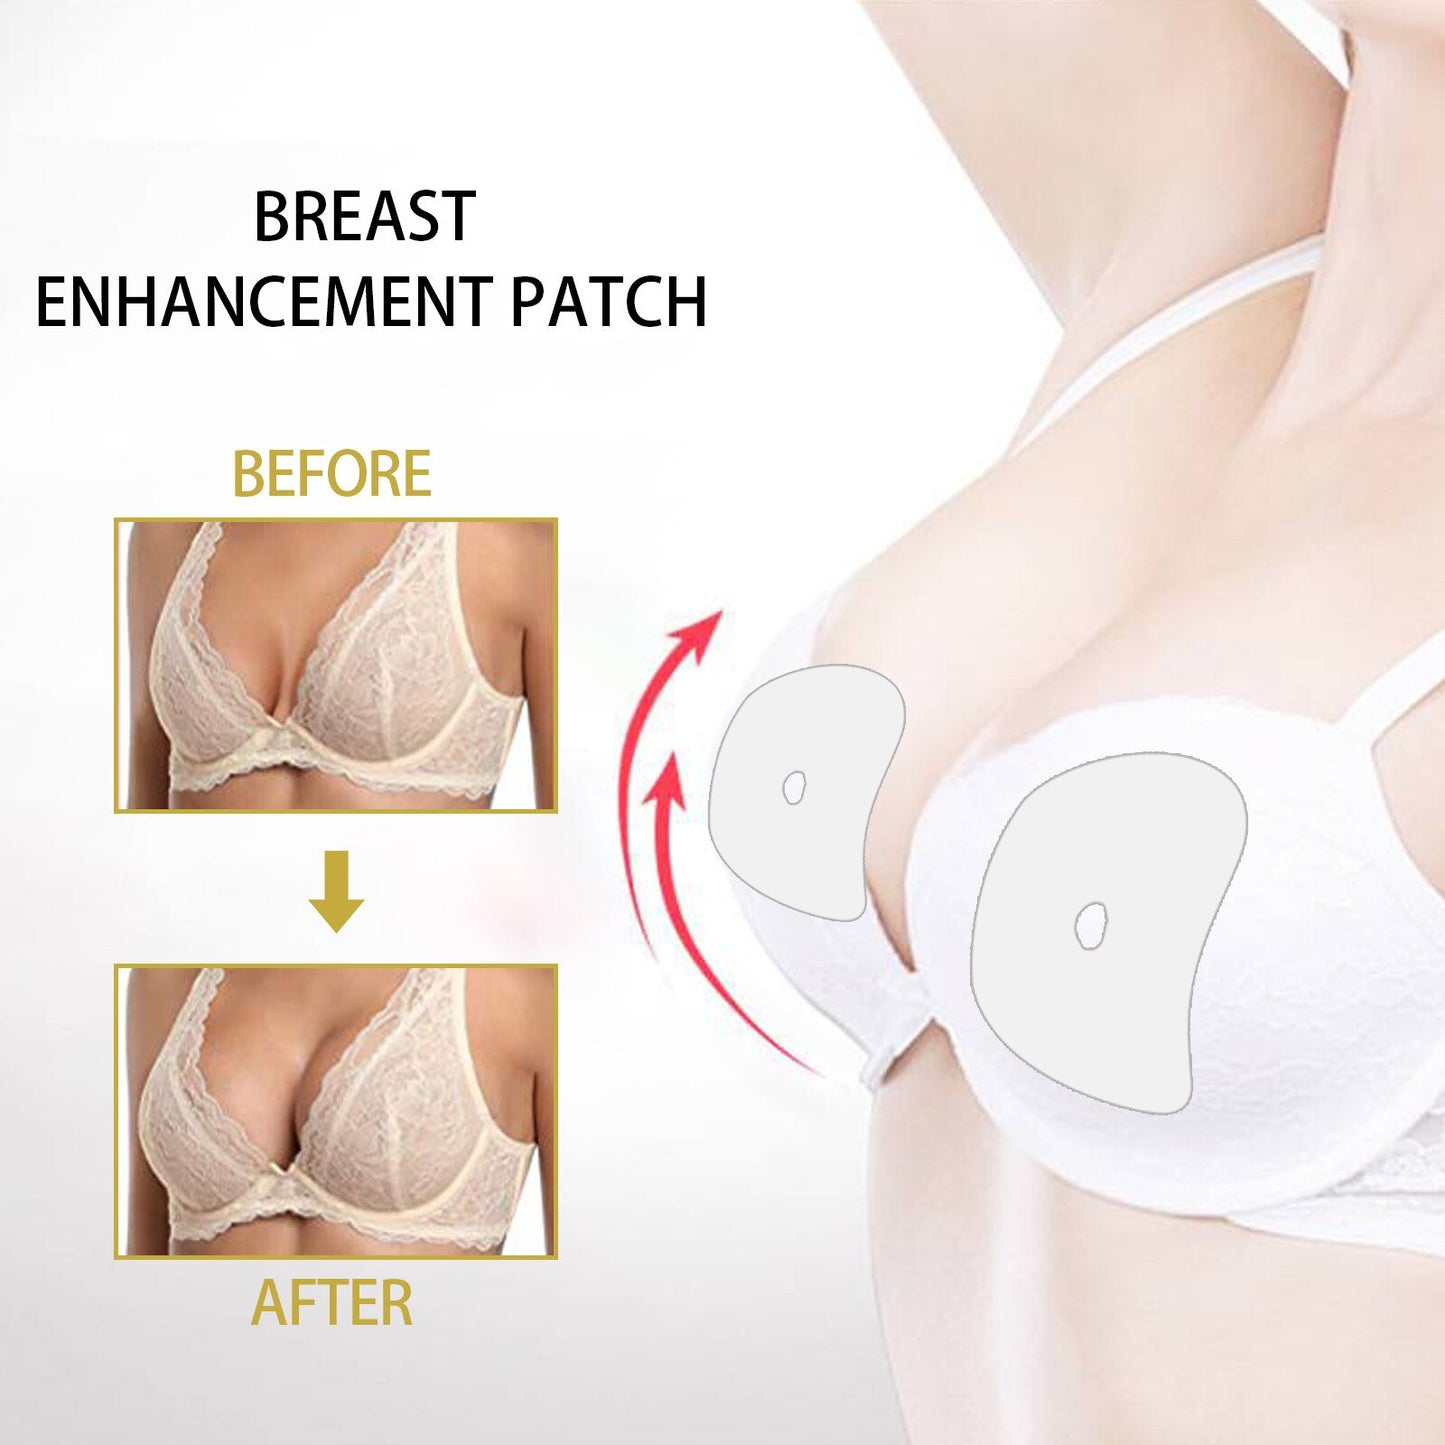 Breast Enlargement Patches Chest Enhancer Promote Female Hormone Lift Firming Breast Growth Plumping Massage Patch Bust Up Care